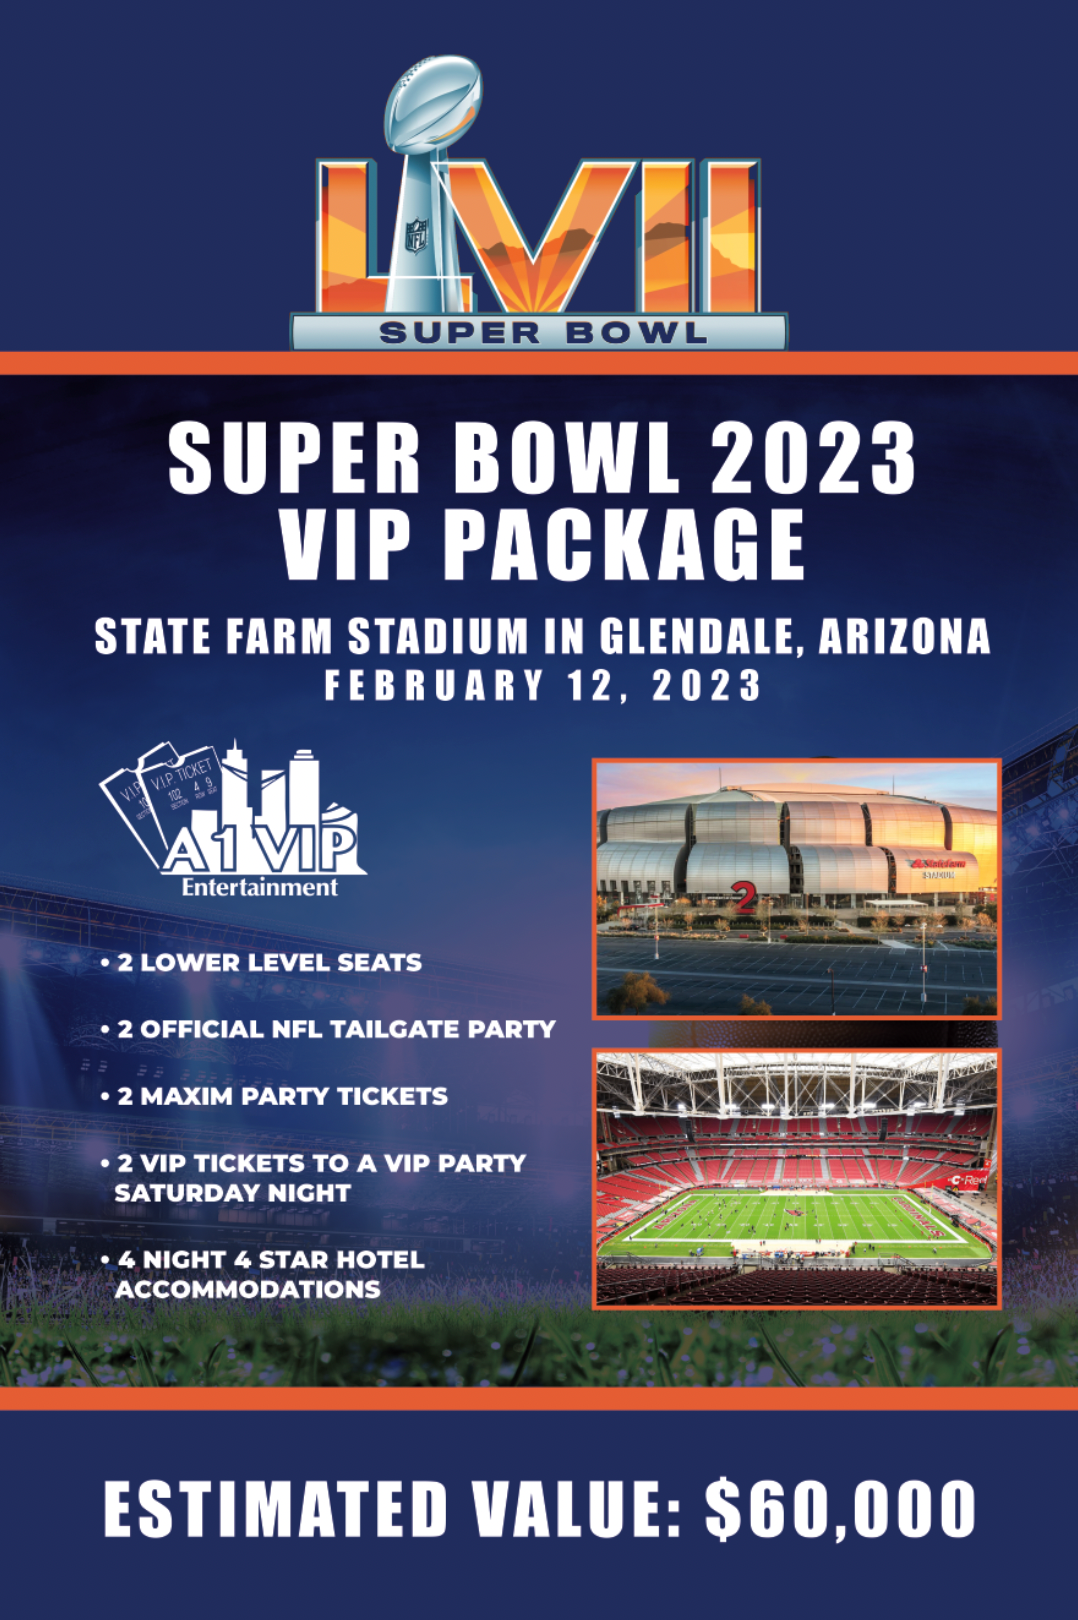 2023 super bowl tickets - OFF-66% > Shipping free